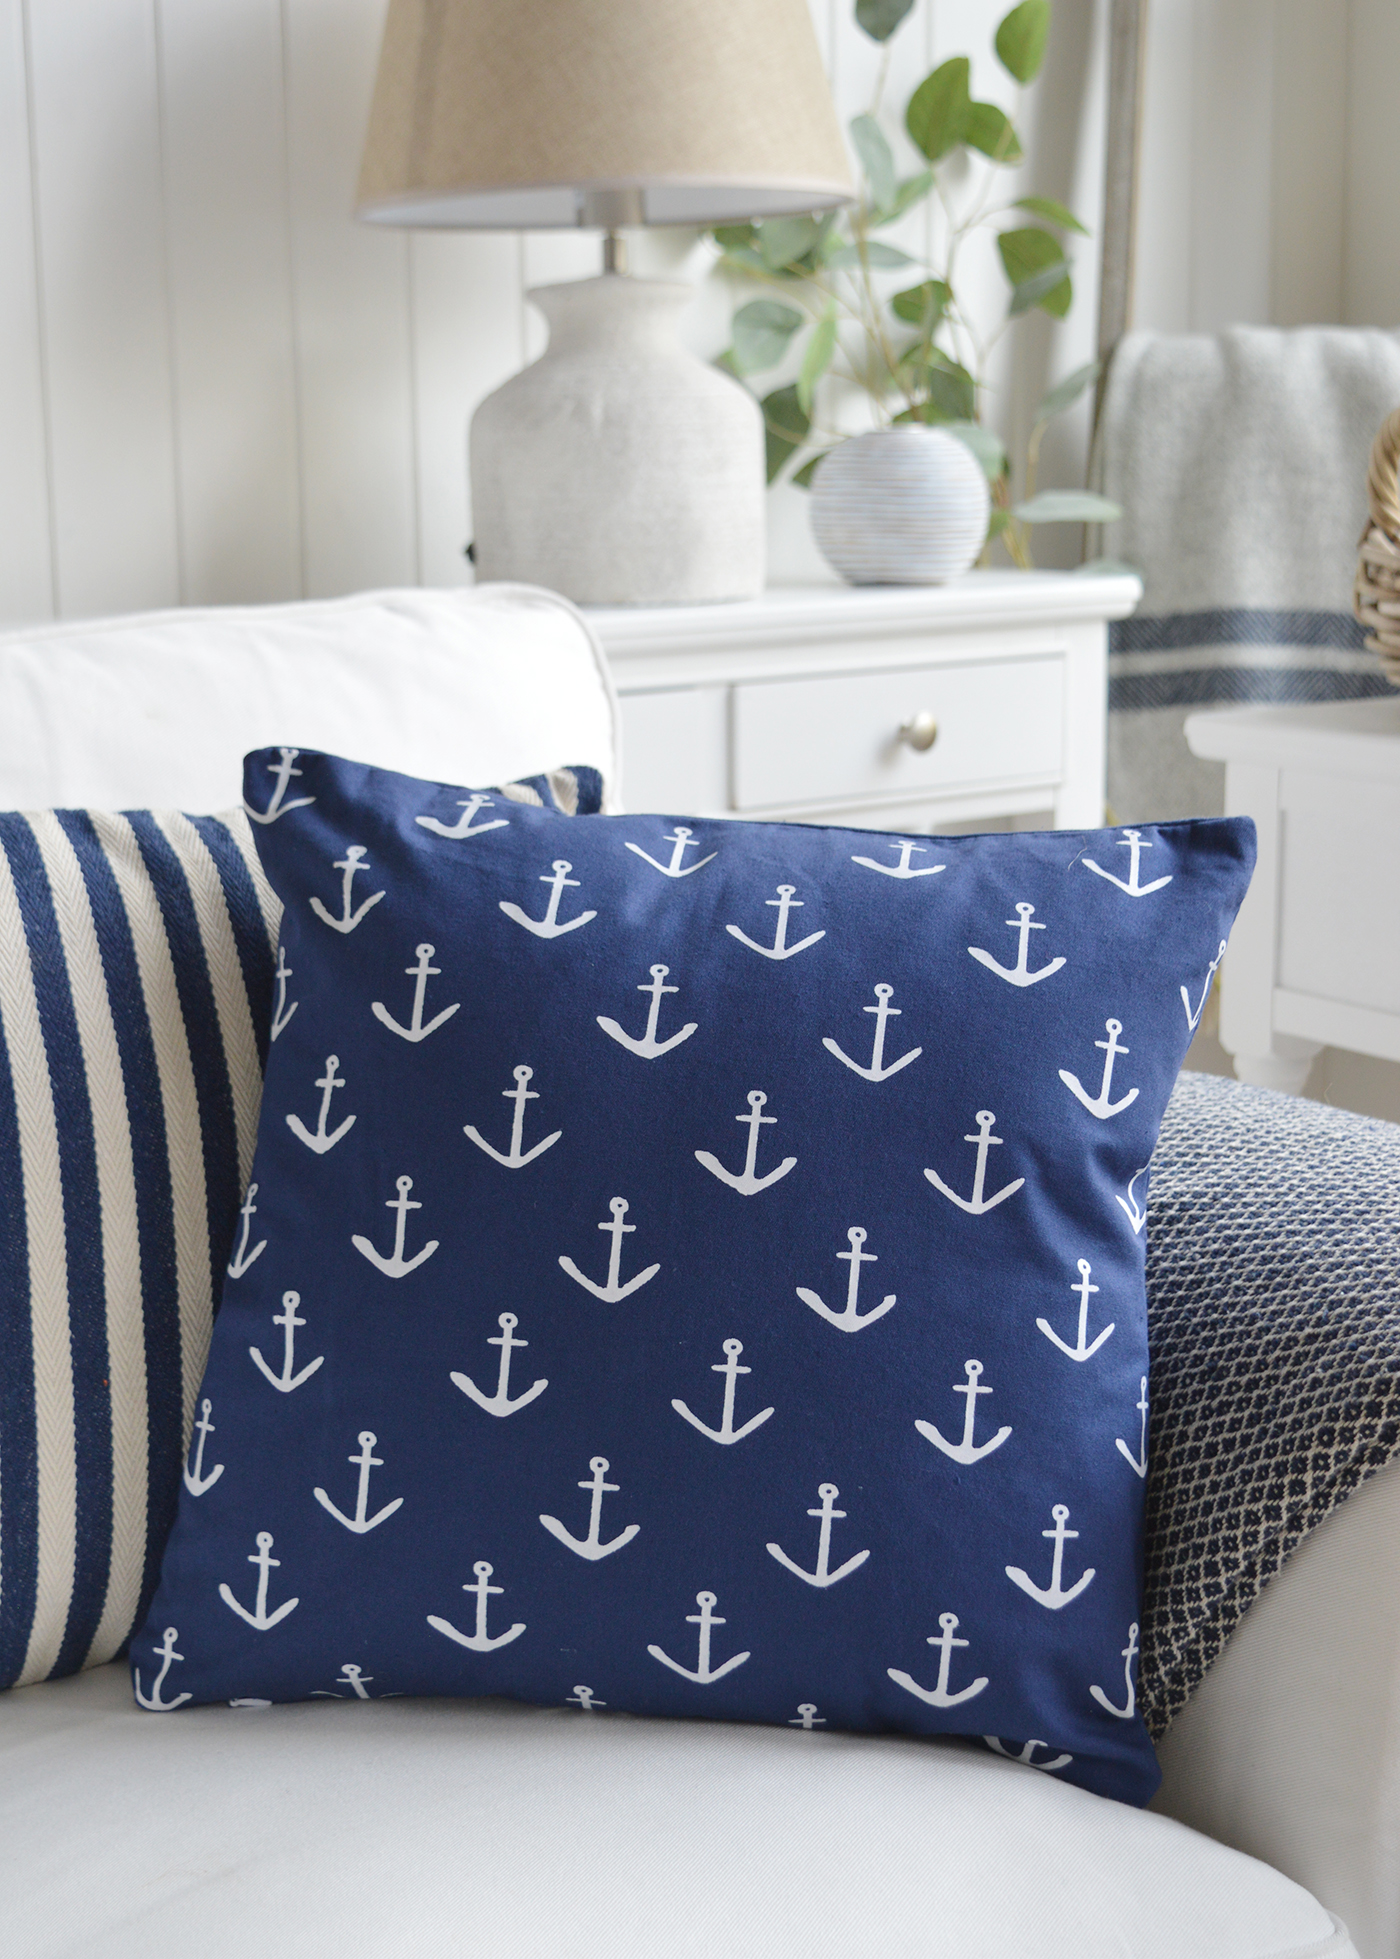 New England Style Country, Coastal and White Furniture and accessories for the home. New England cushions and soft furnishing - Coastal cushions -  white and navy anchor cushion